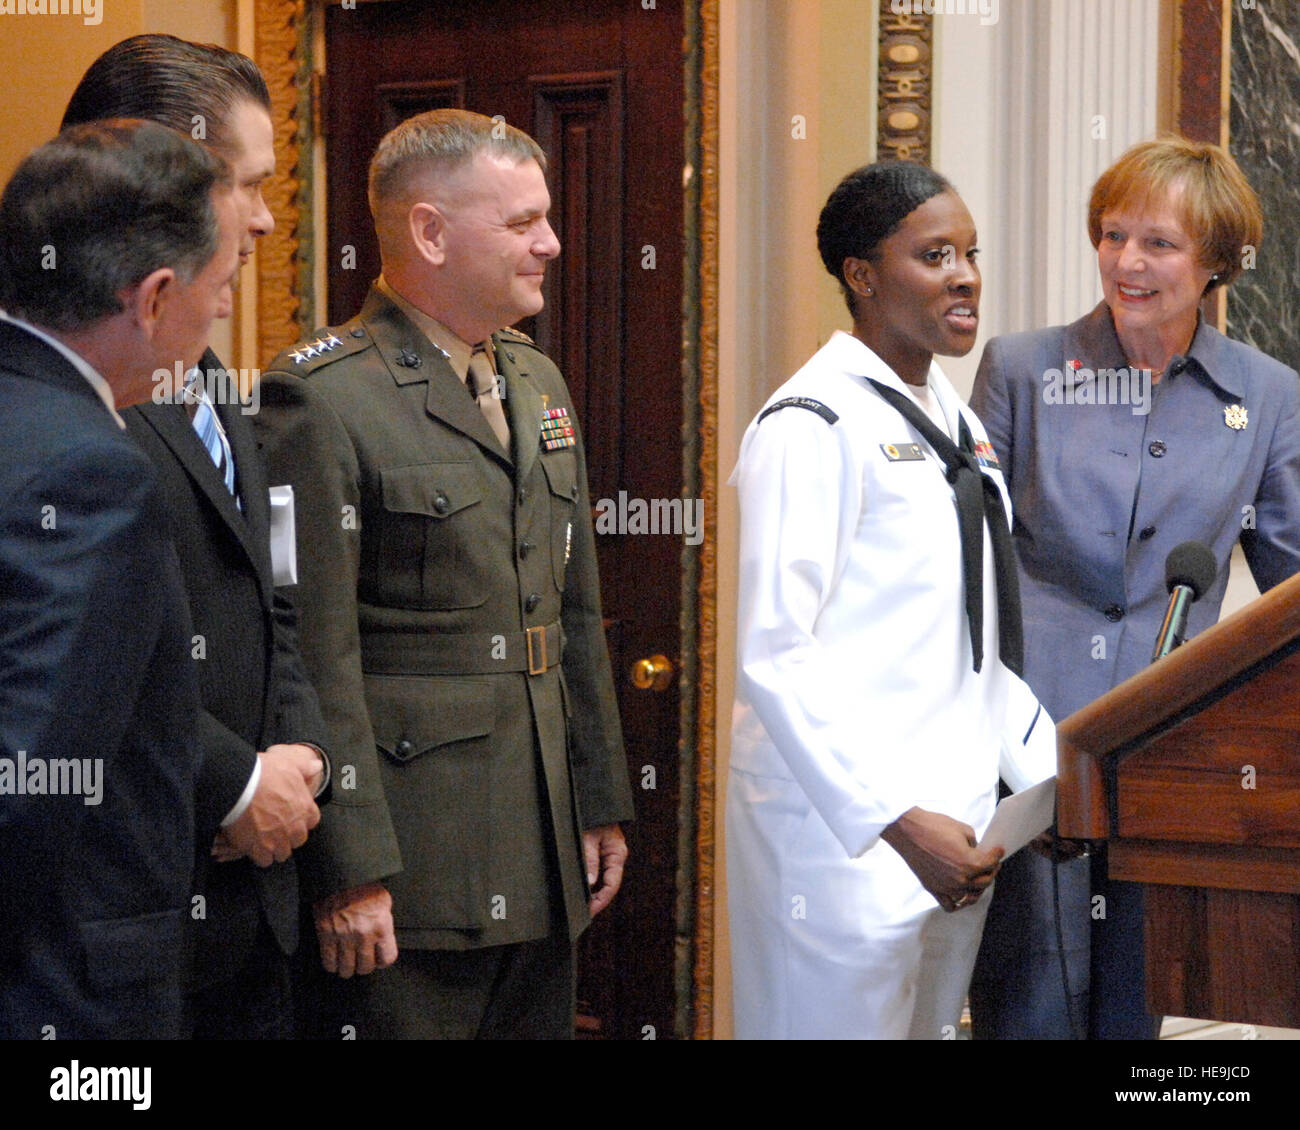 Navy Petty Officer 1st Class Haneefah Collins (in white) speaks to the audience at the USA Freedom Corps President's Volunteer Service Awards presentation May 16, 2008, at the Eisenhower Executive Office Building in Washington. From left, USA Freedom Corps director Henry Lozano, actor Stephen Baldwin, Vice Chairman of the Joint Chiefs of Staff Marine Gen. James E. Cartwright and President's Council on Service and Civic Participation member Mary Jo Myers presented an award to Collins for her volunteer service.  Air Force Tech. Sgt. Adam M. Stump. (Released) Stock Photo